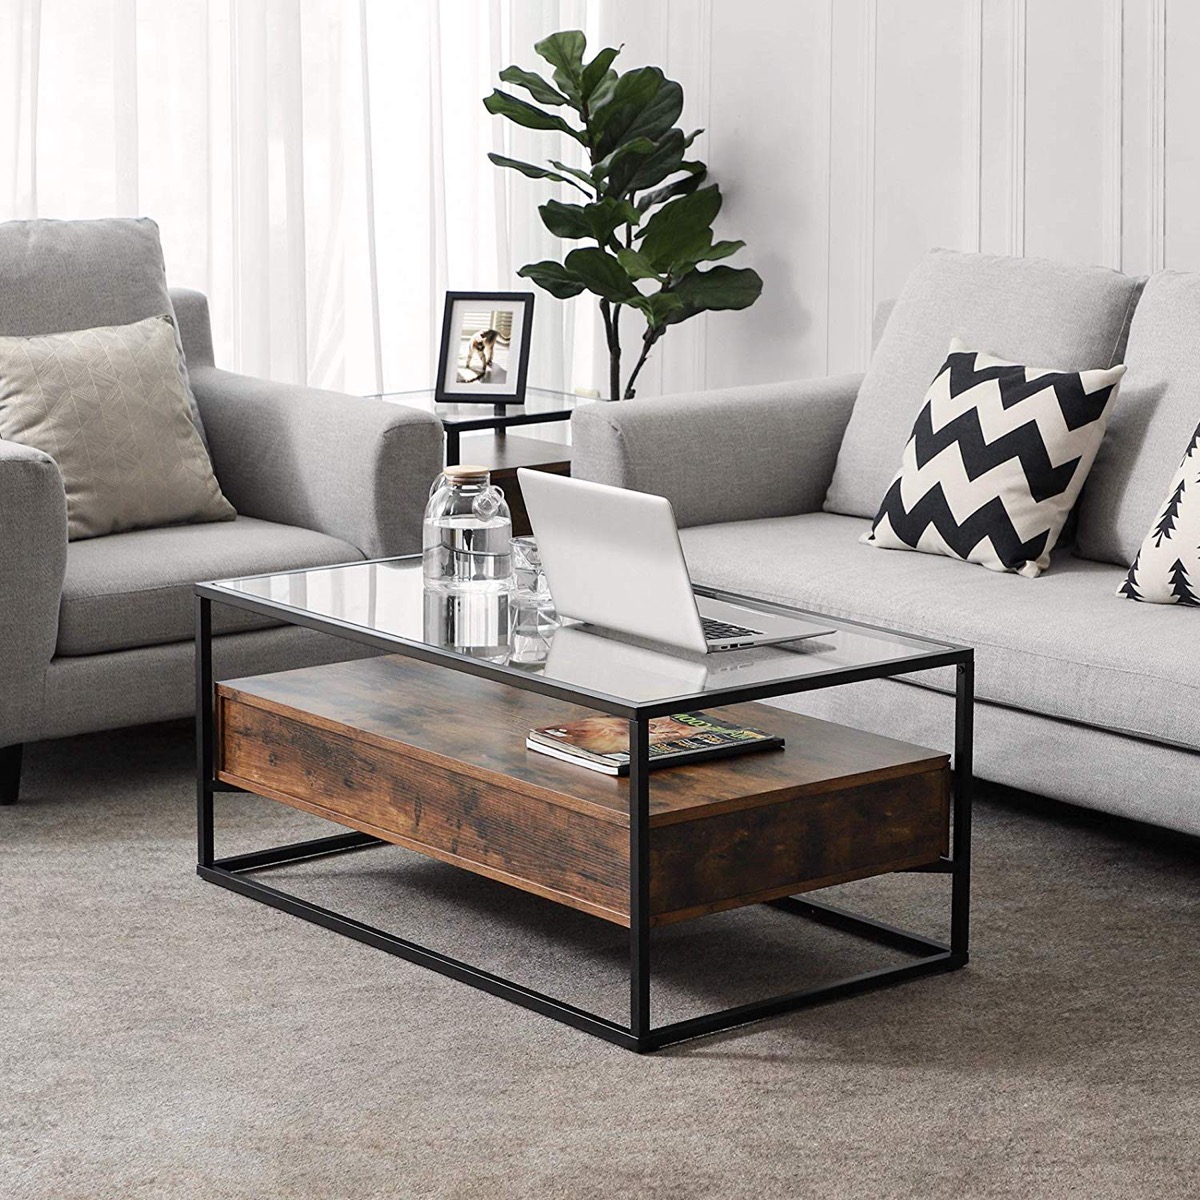 51 Glass Coffee Tables That Every, Small Glass Side Tables For Living Room